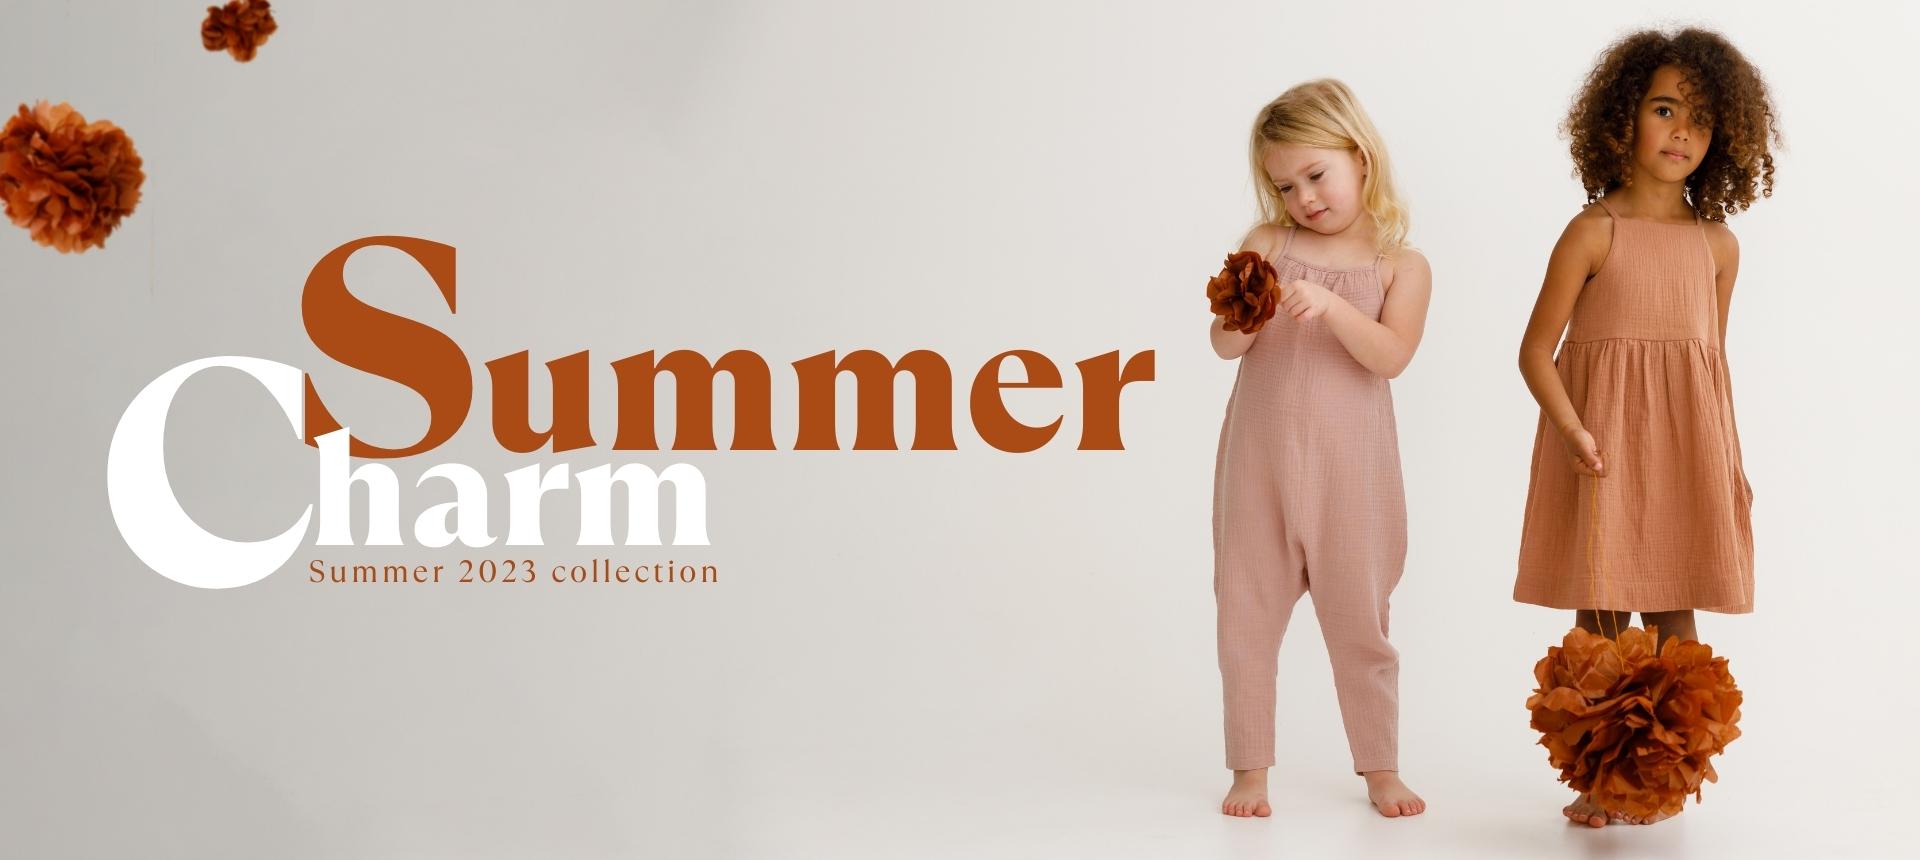 summer 2023 collection